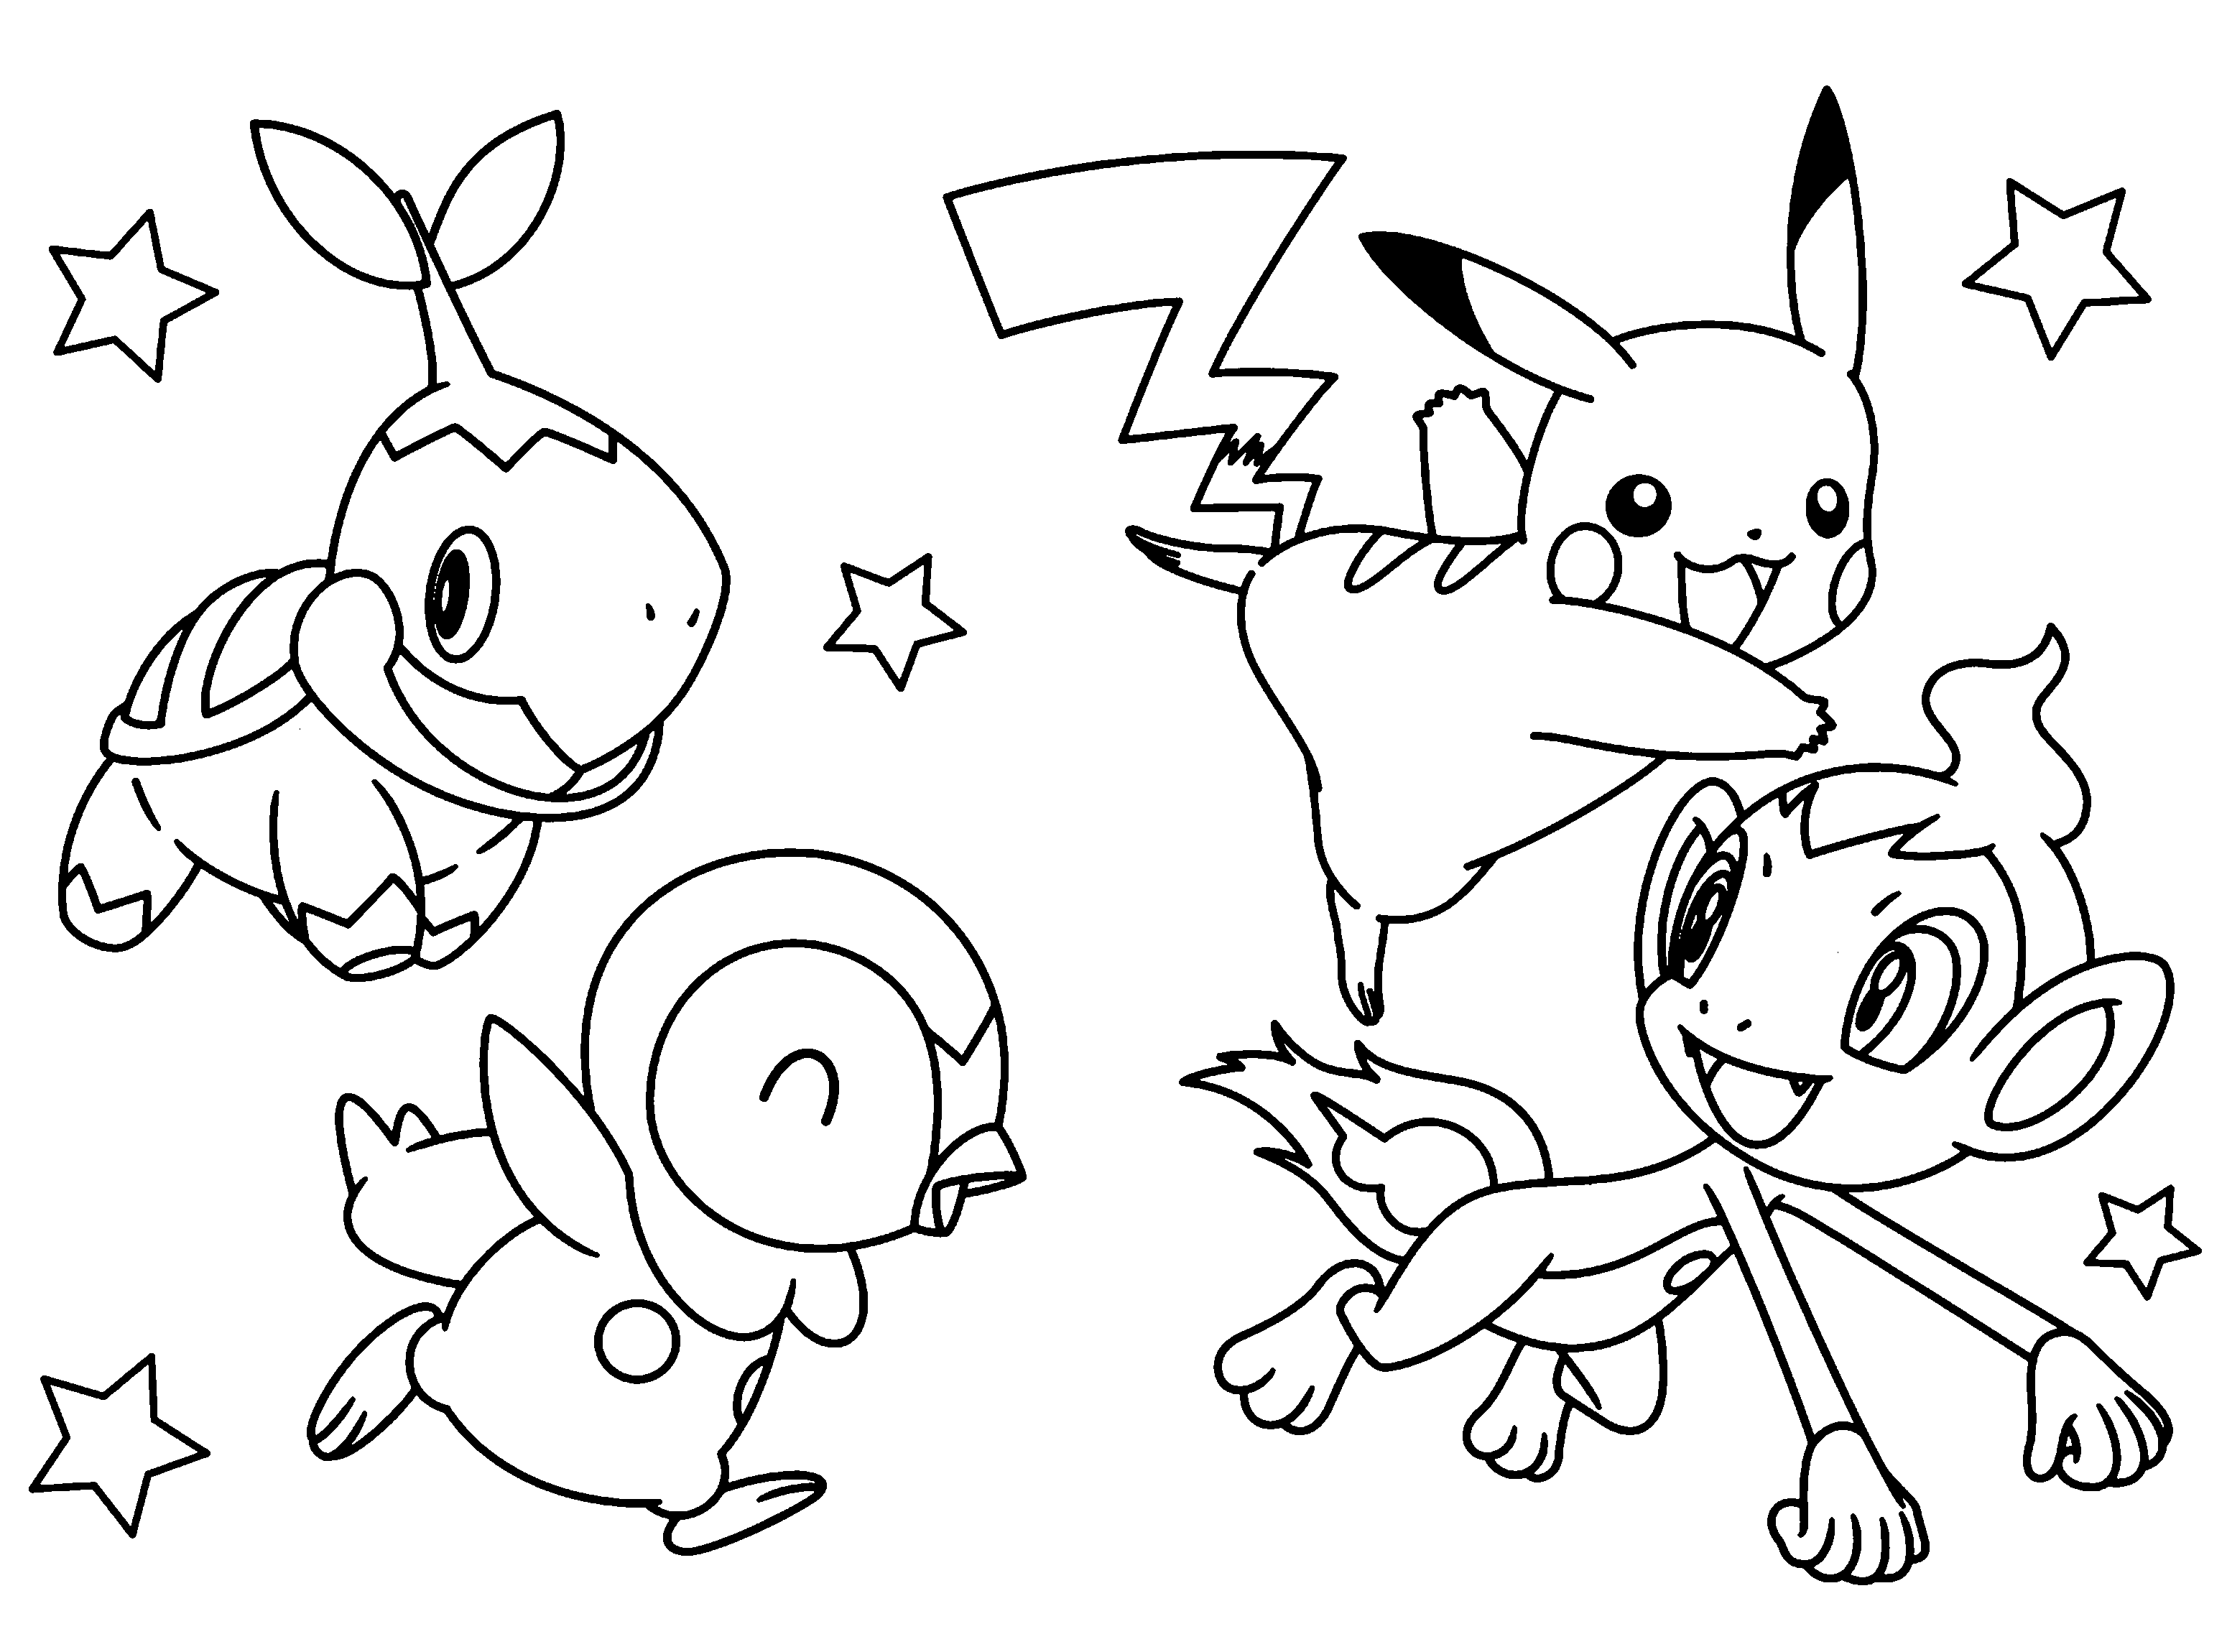 Pokemon Starters Coloring Pages